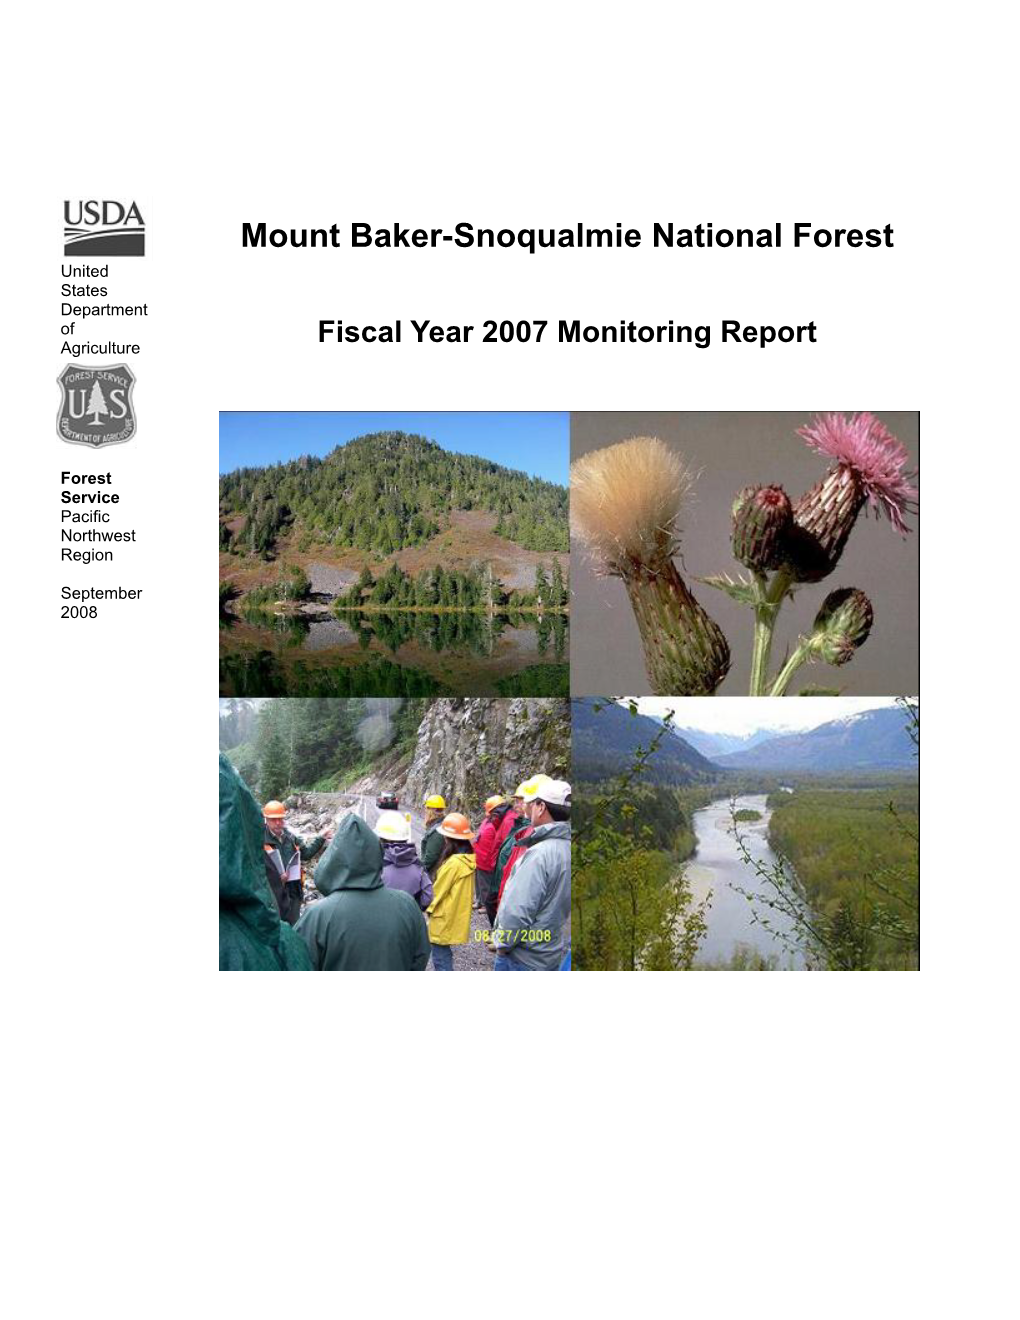 Mt. Baker-Snoqualmie National Forest Monitoring Report